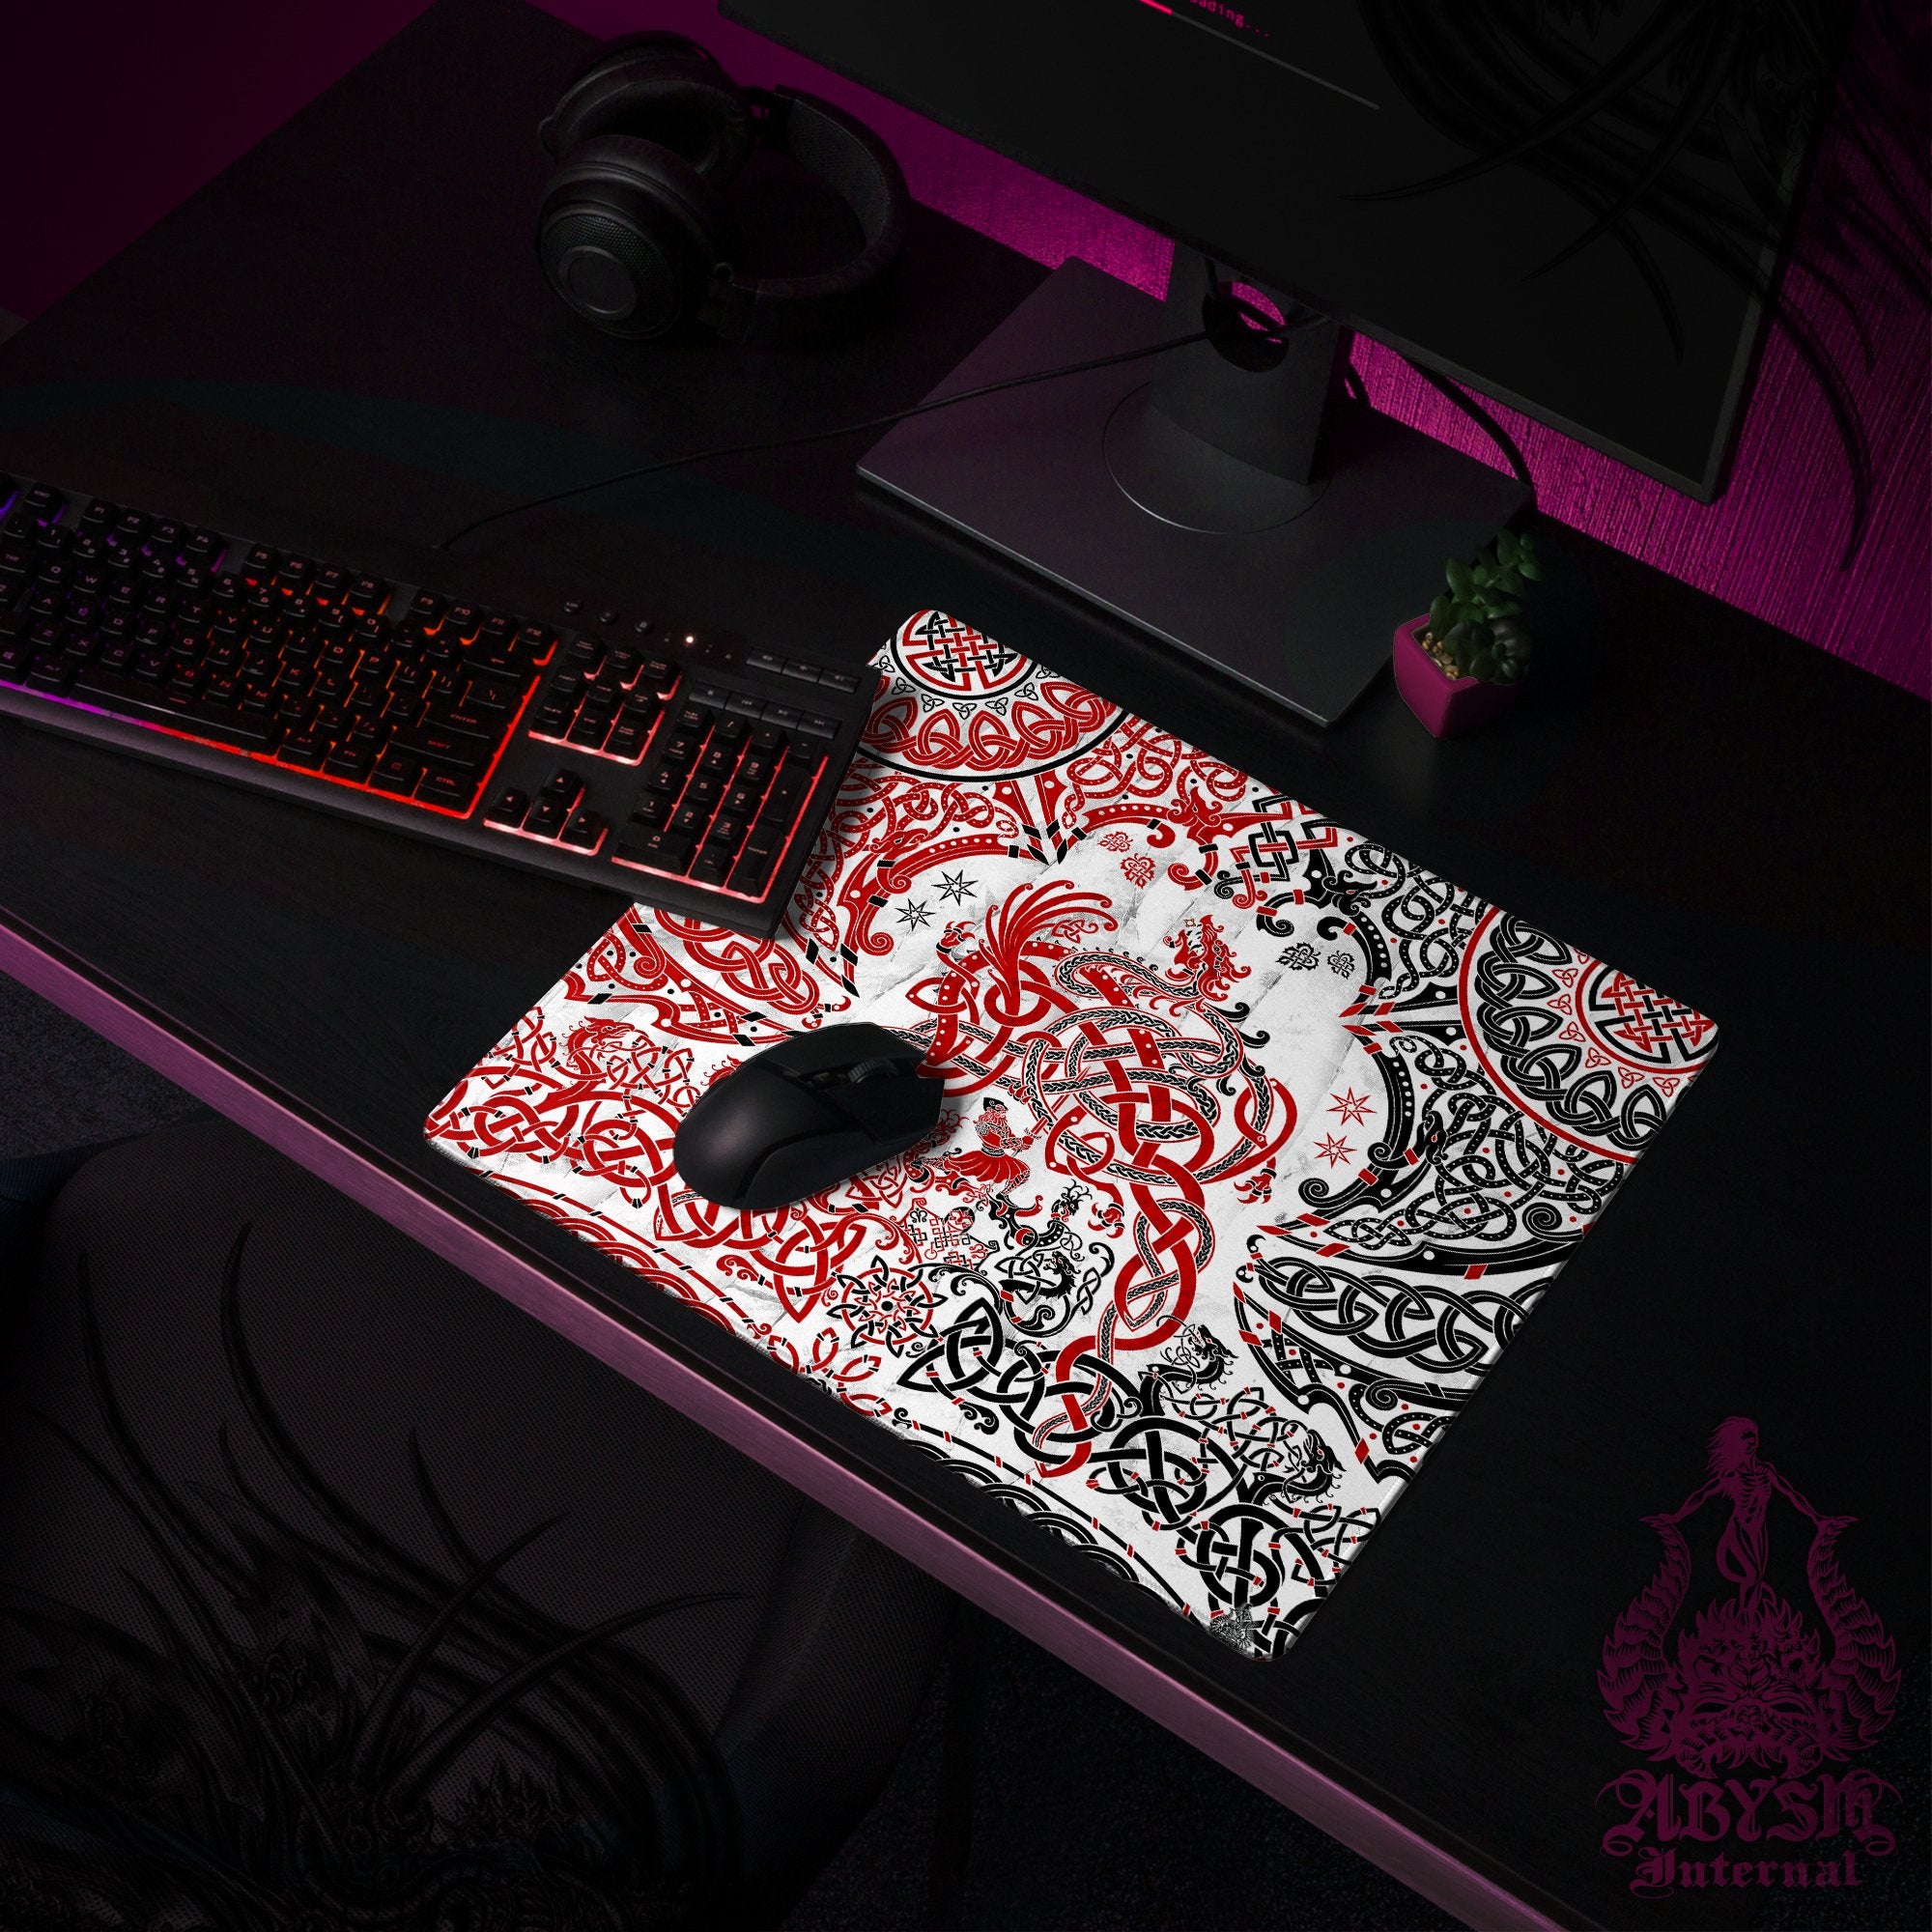 Nordic Dragon Desk Mat, Viking Gaming Mouse Pad, Norse Knotwork Table Protector Cover, Fafnir Workpad, Art Print - Red White Black - Abysm Internal